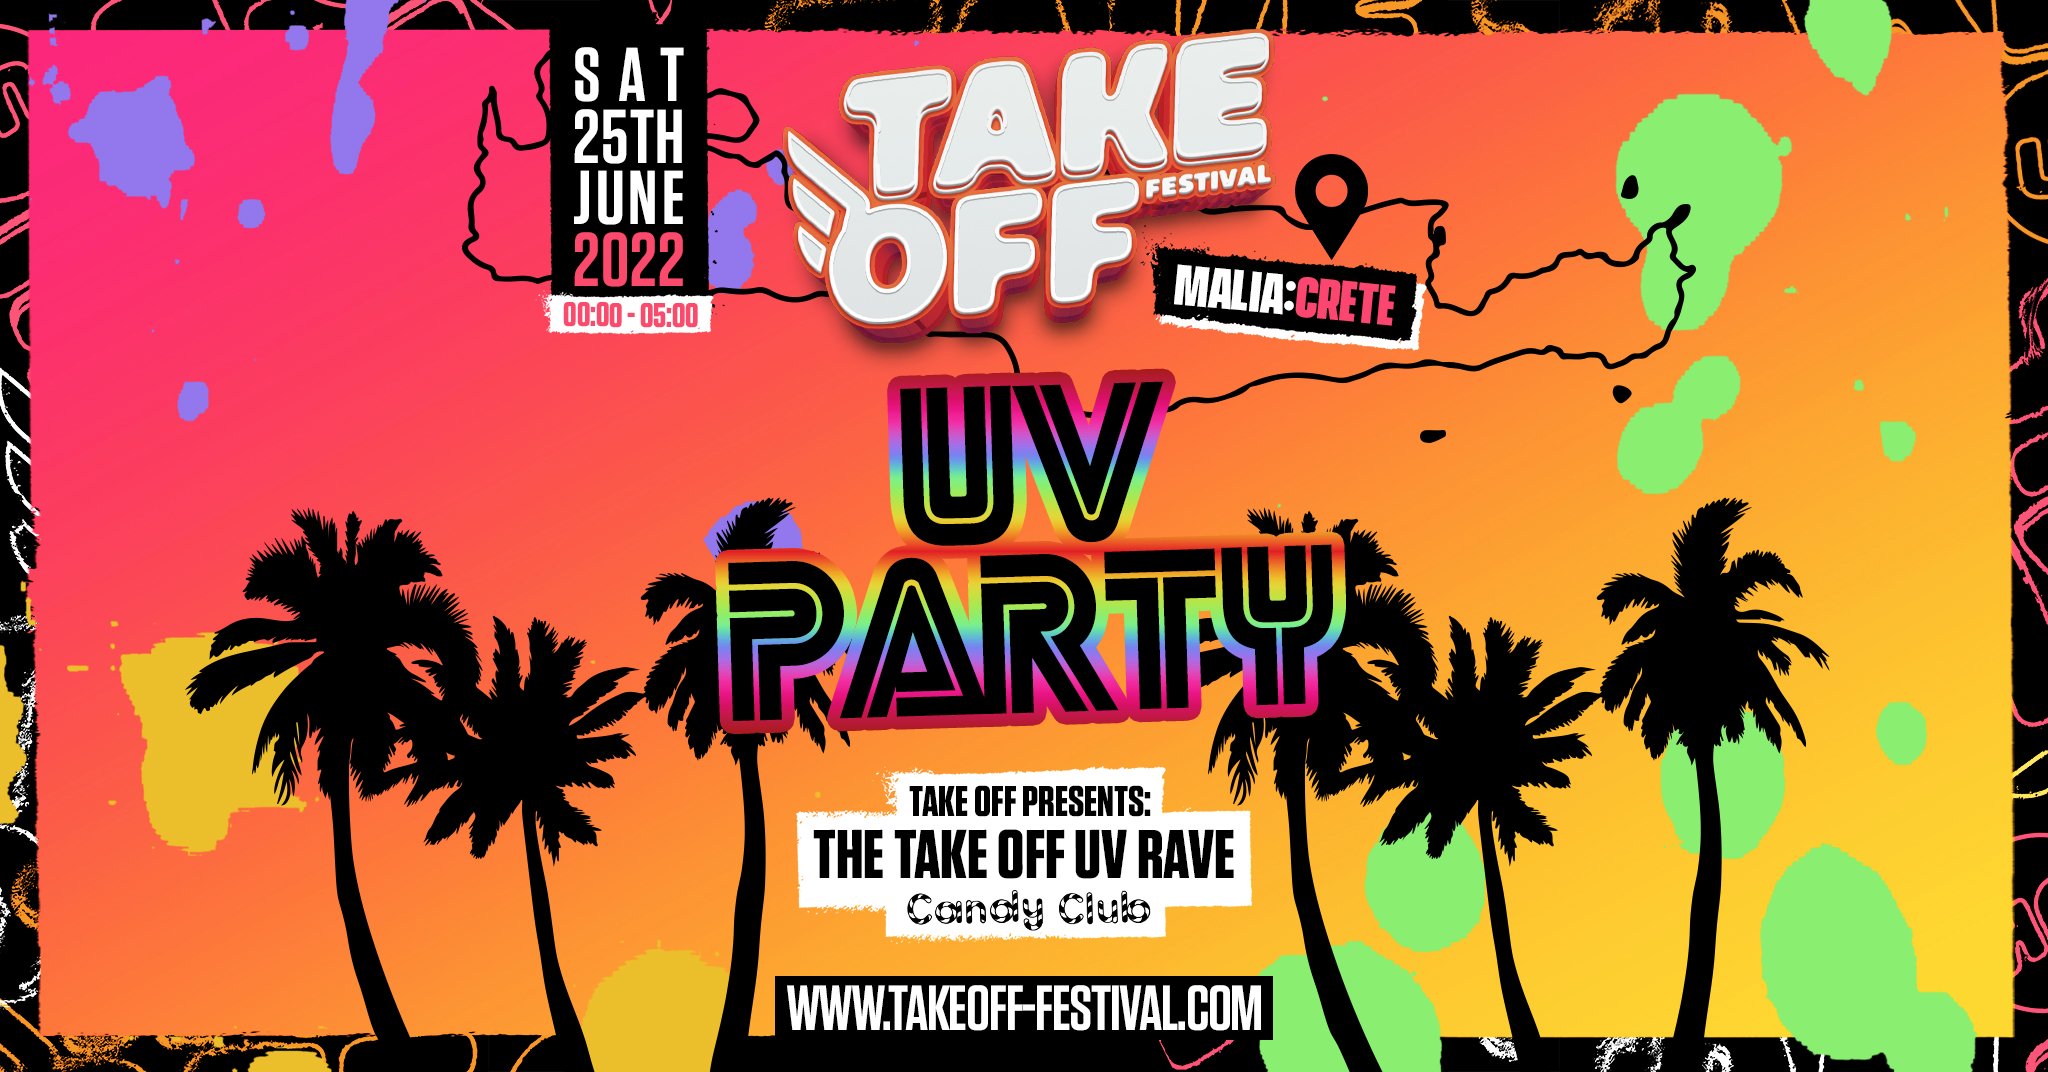 Take Off Presents: UV Paint Party at Candy Club €5! (TONIGHT!)